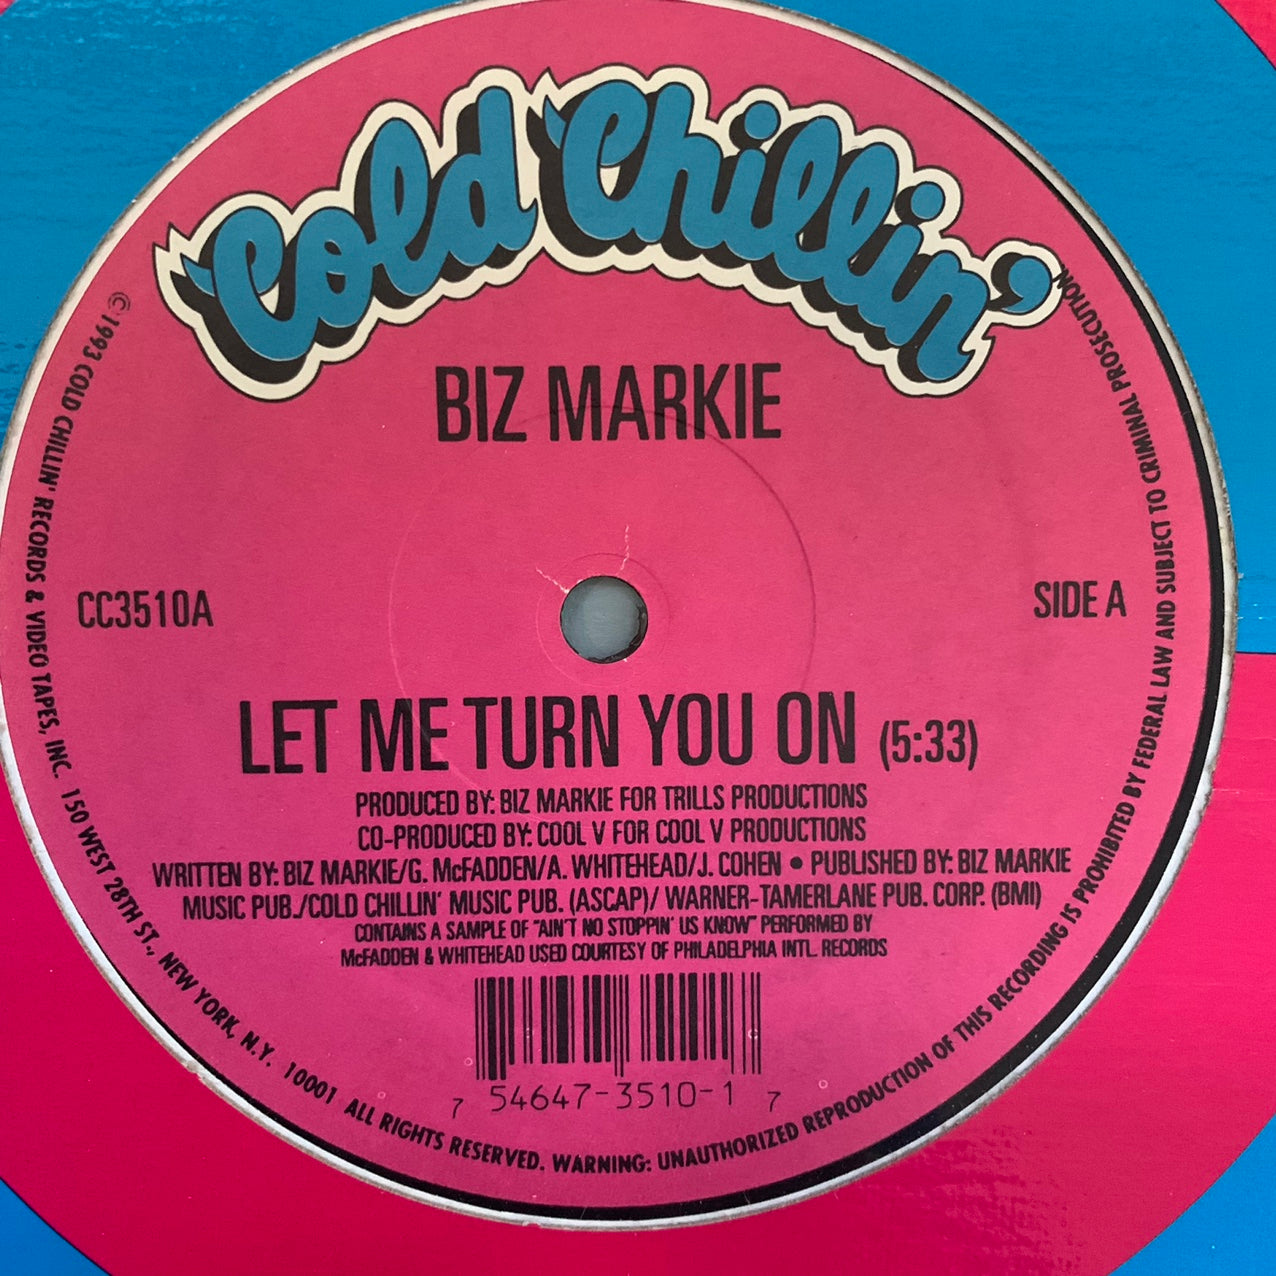 Biz Markie “Let Me Turn You On” / “Spring Again” 2 Track 12inch Vinyl, Cold Chillin’ Records